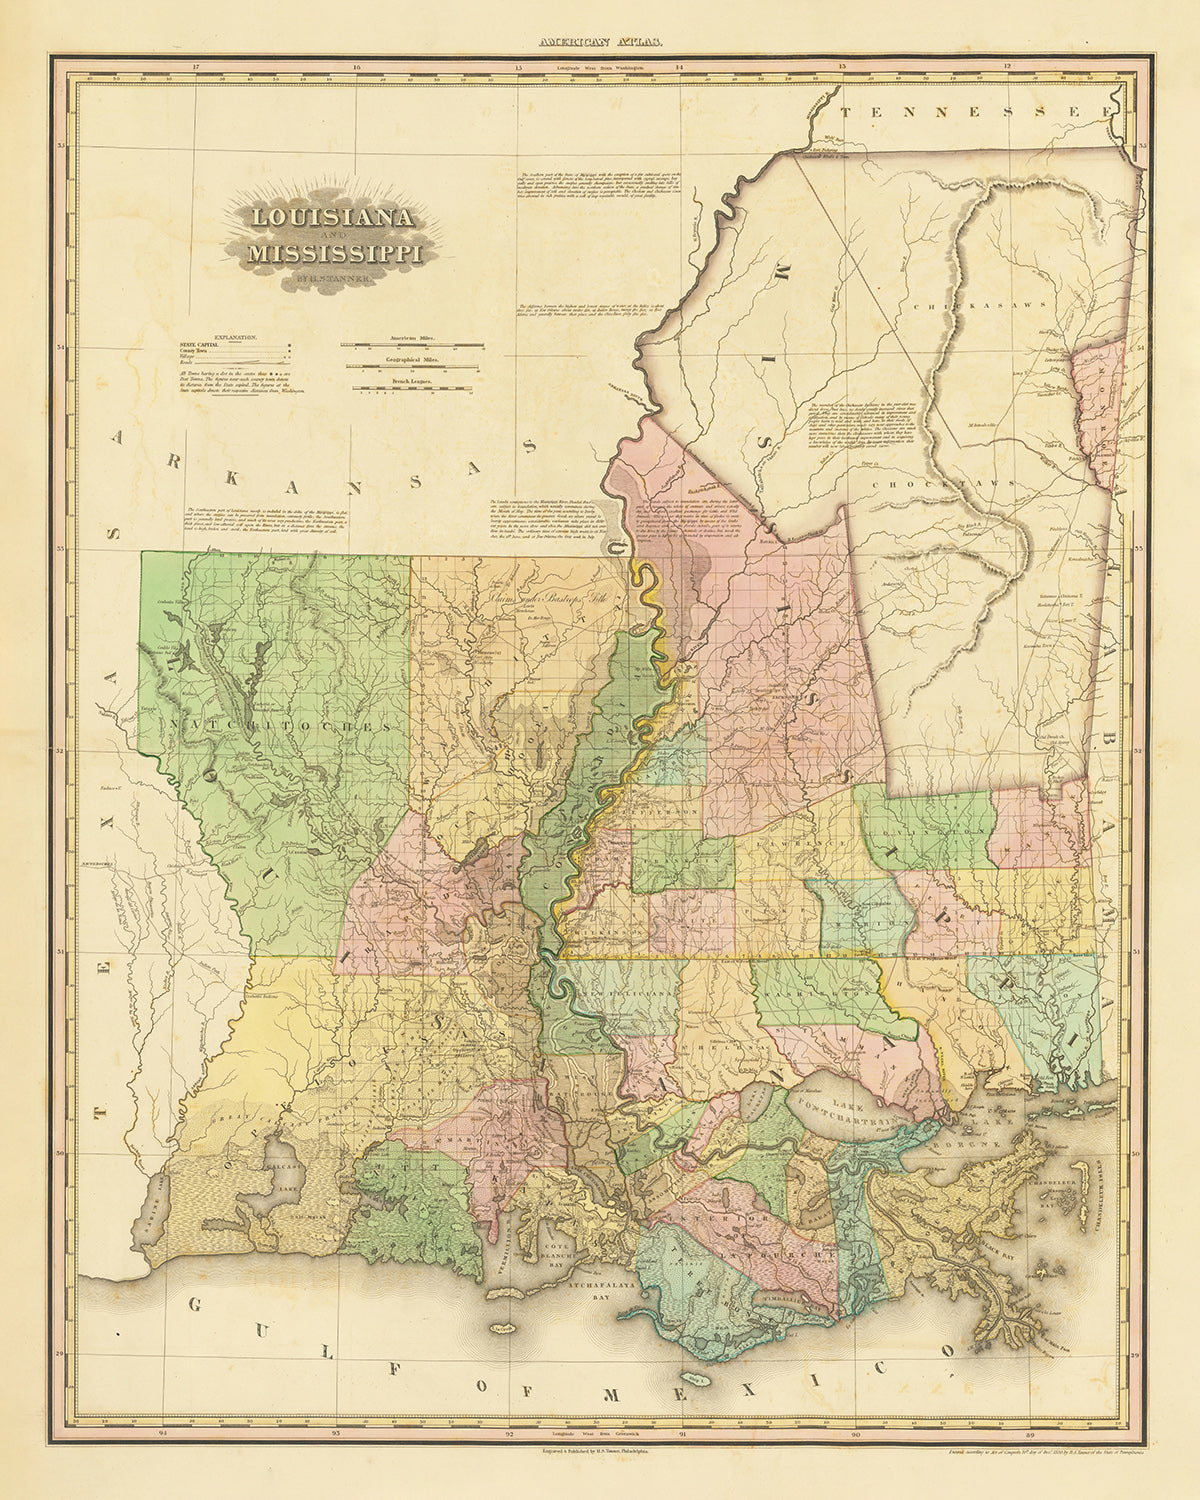 Old Map of Louisiana and Mississippi by H. S. Tanner, 1820: New Orleans, Baton Rouge, Jackson, Gulfport, and Lafayette